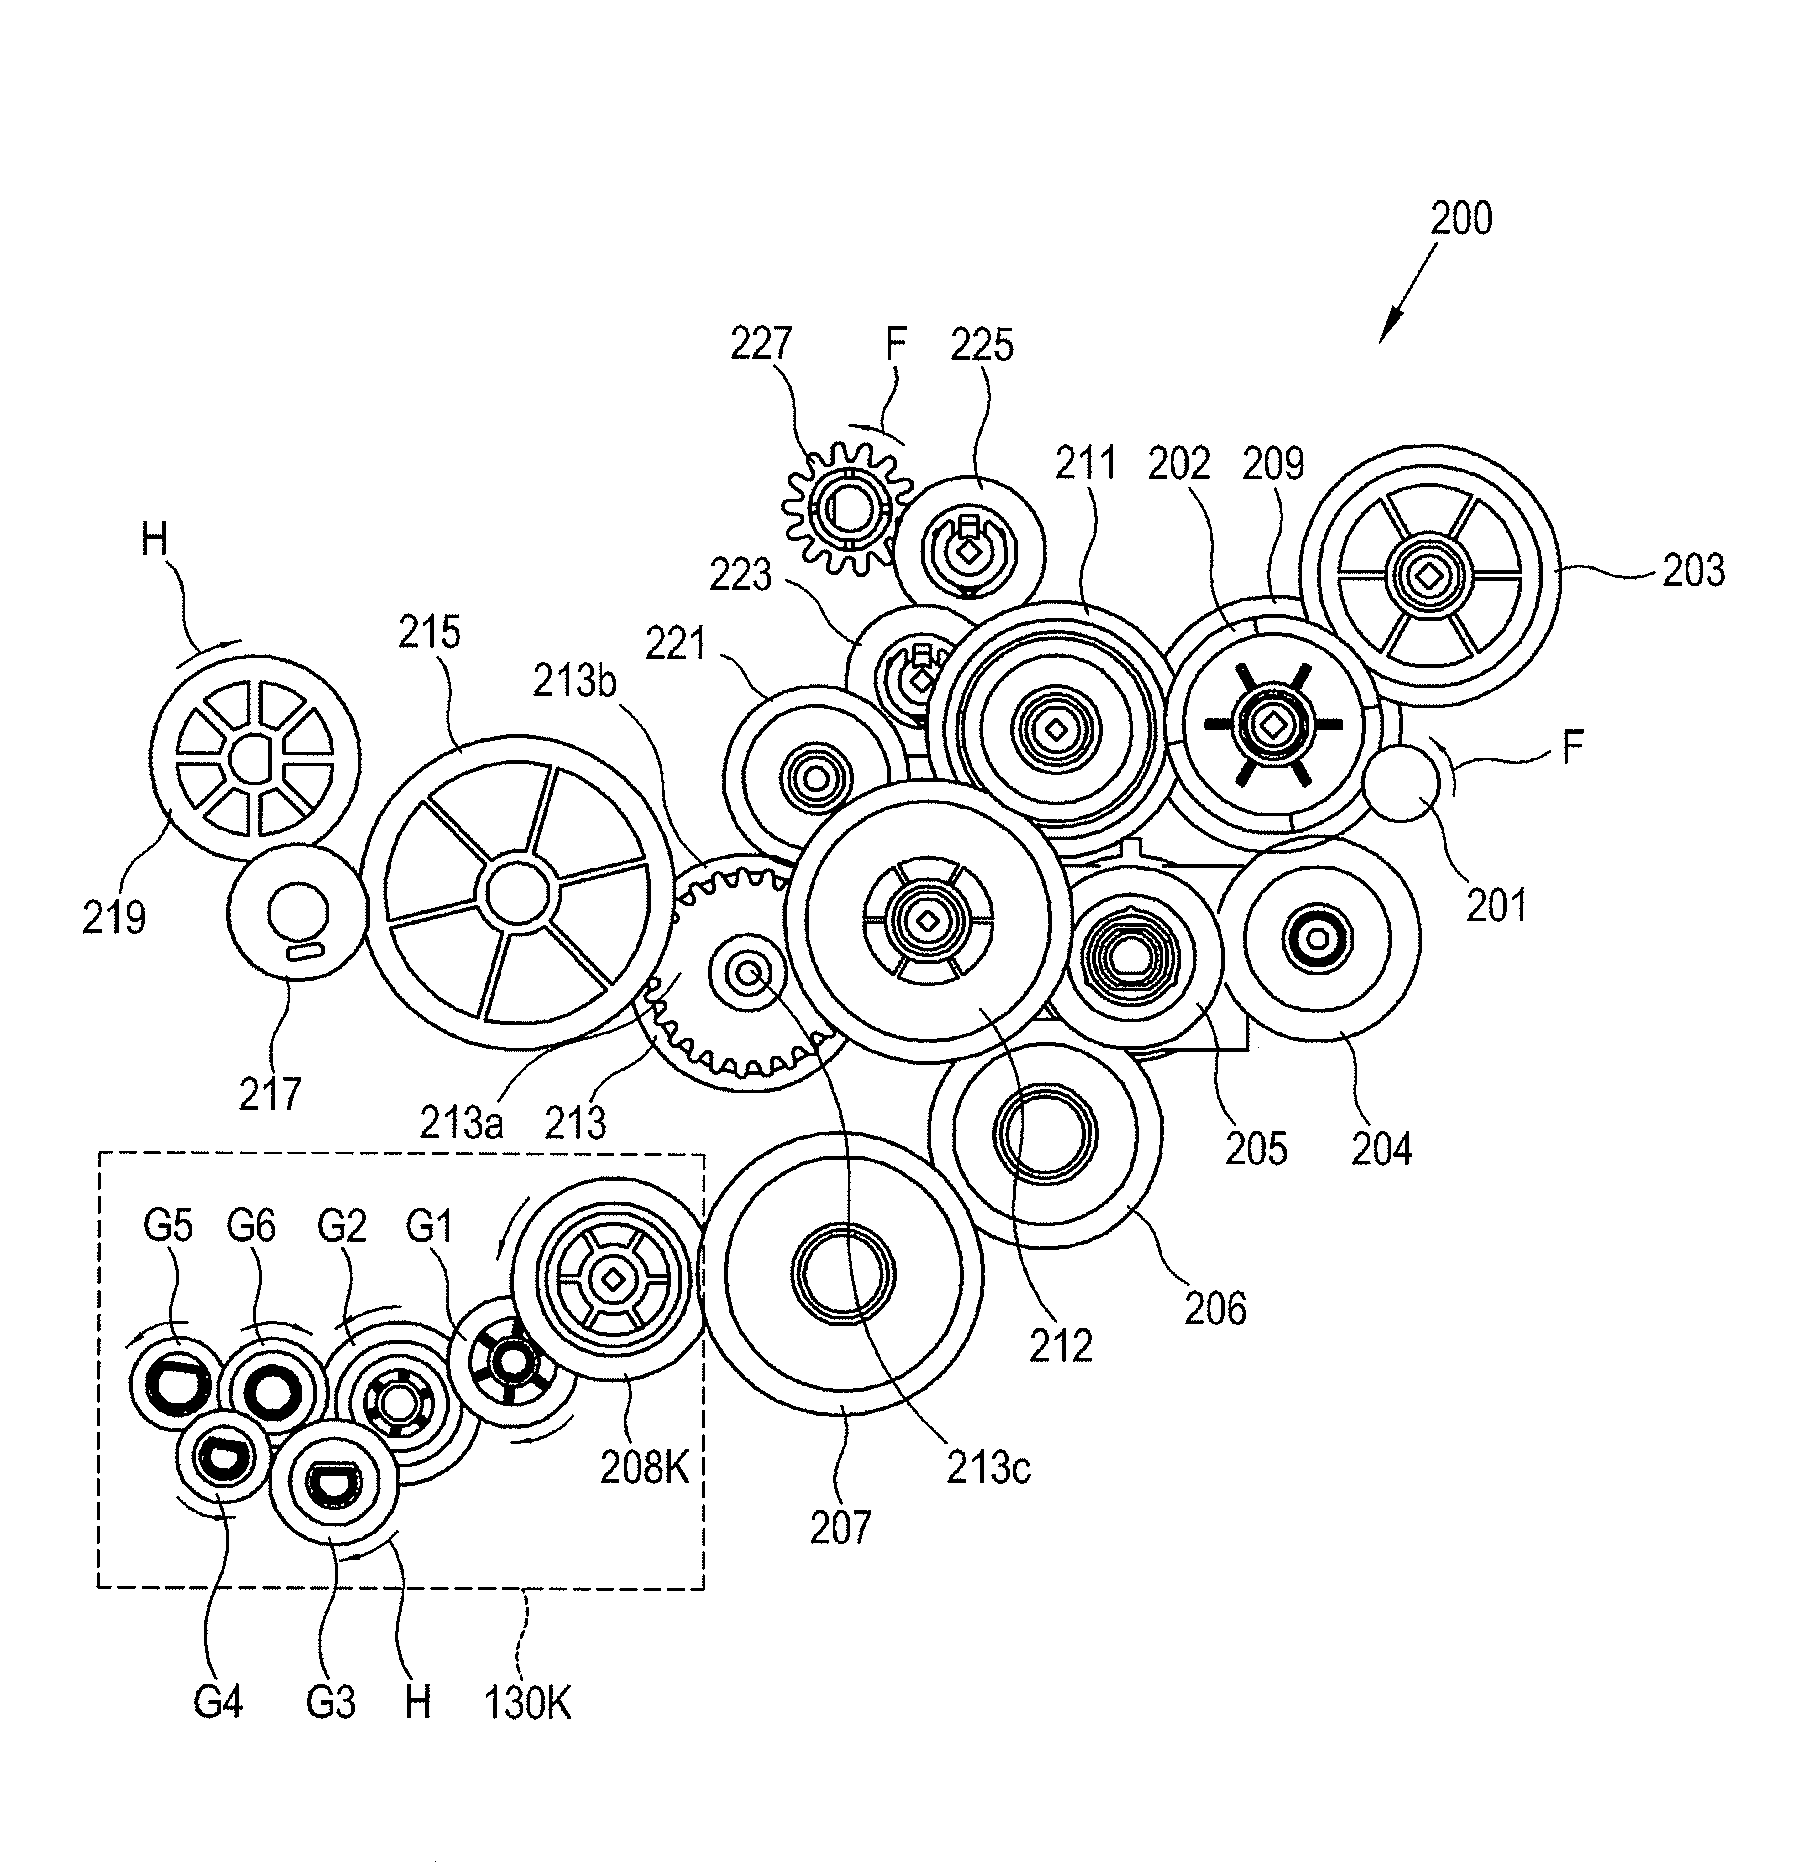 Image forming apparatus having controller to selectively control plurality of driving sources